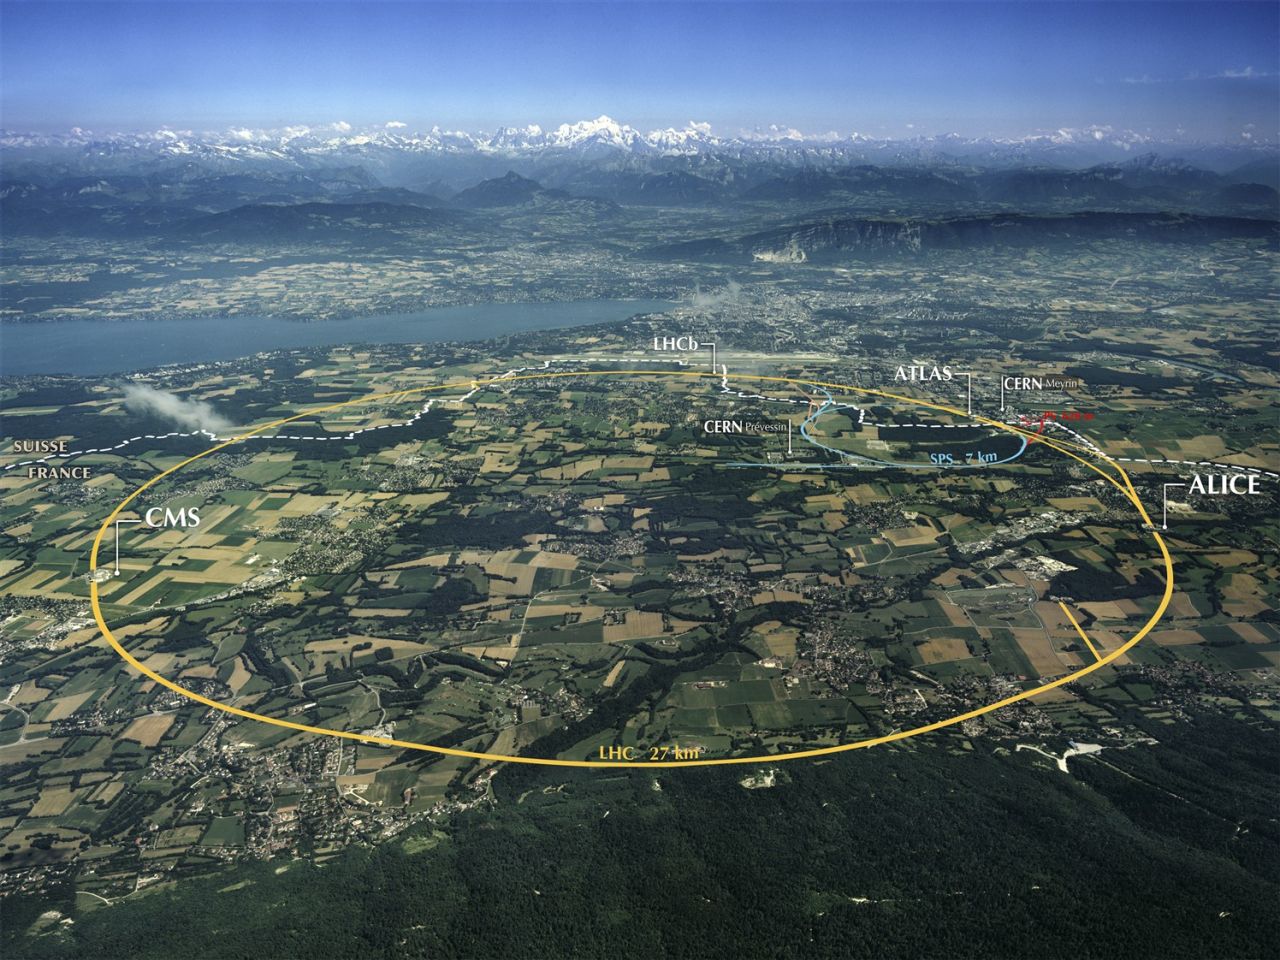 An aerial view of the area surrounding CERN with the outline of the 27km underground tunnel that houses the particle accelerator.